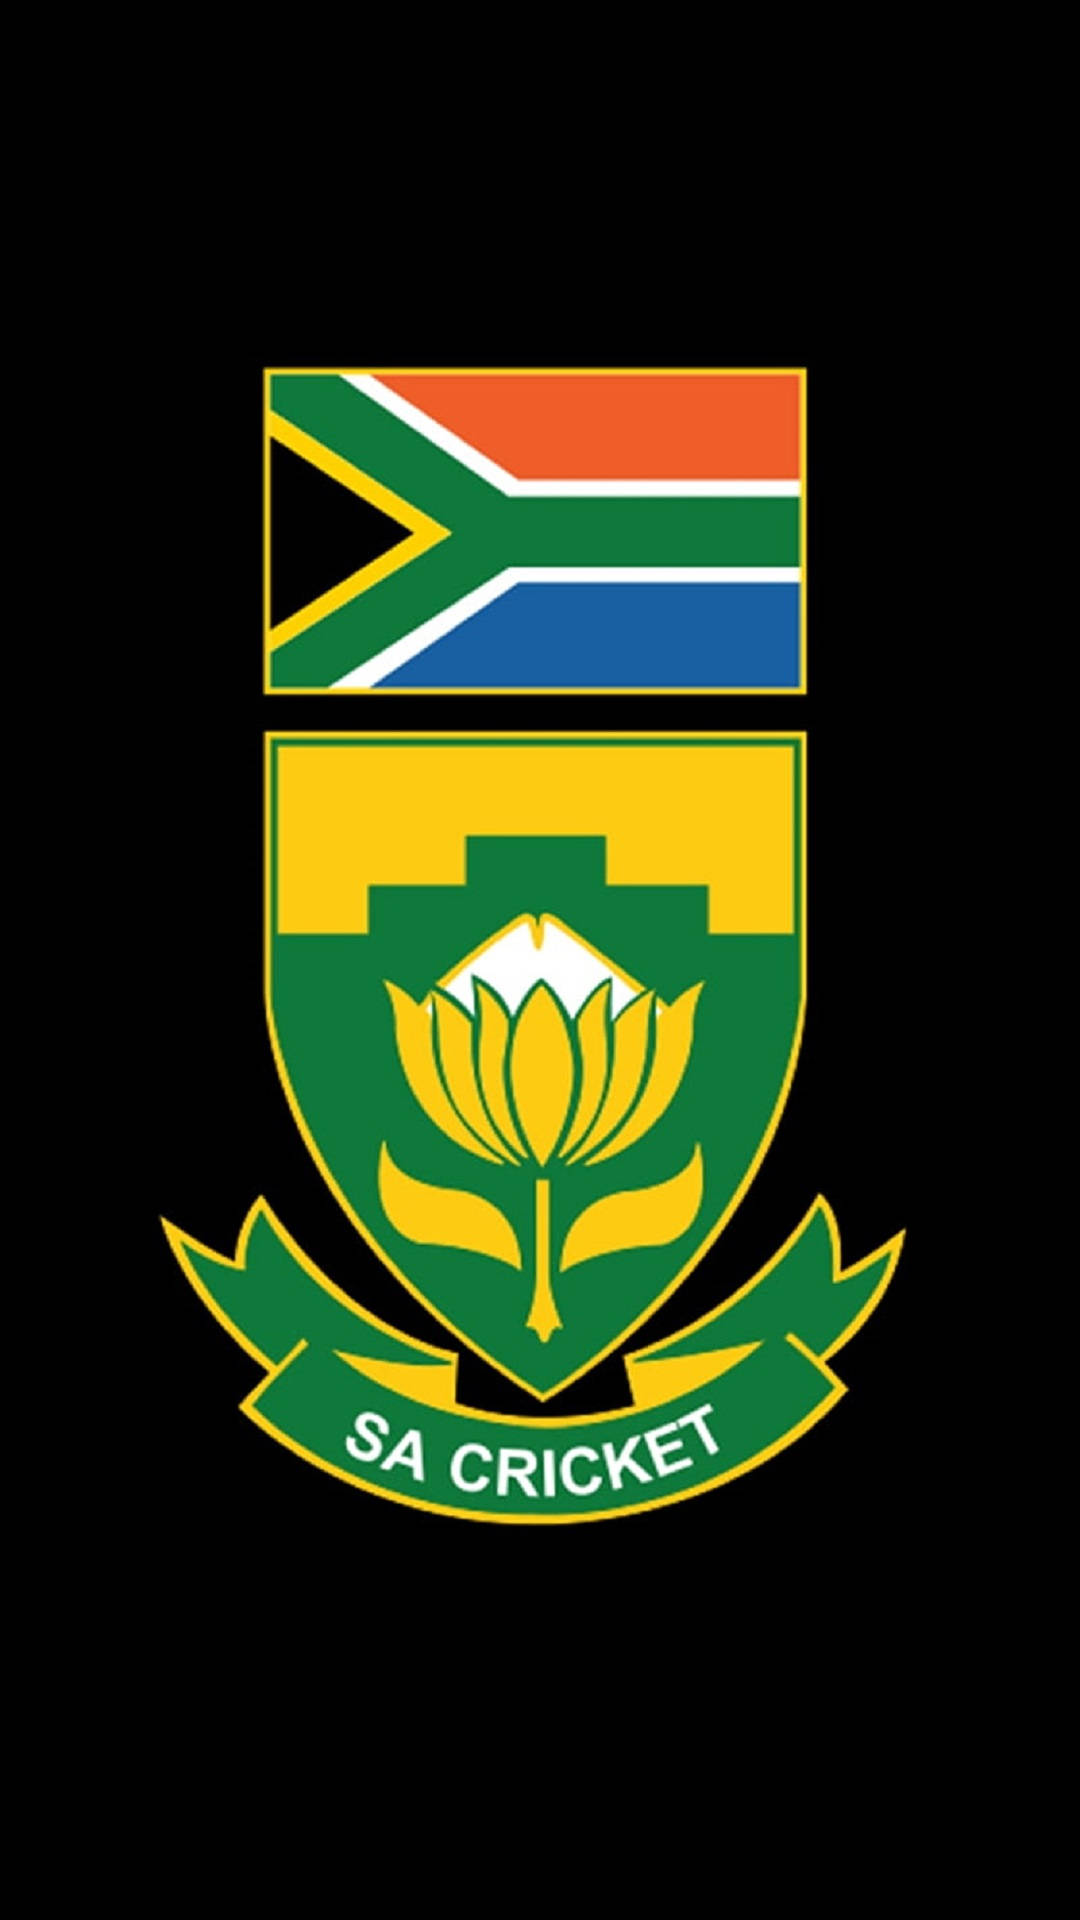 South Africa Cricket Logo In Black